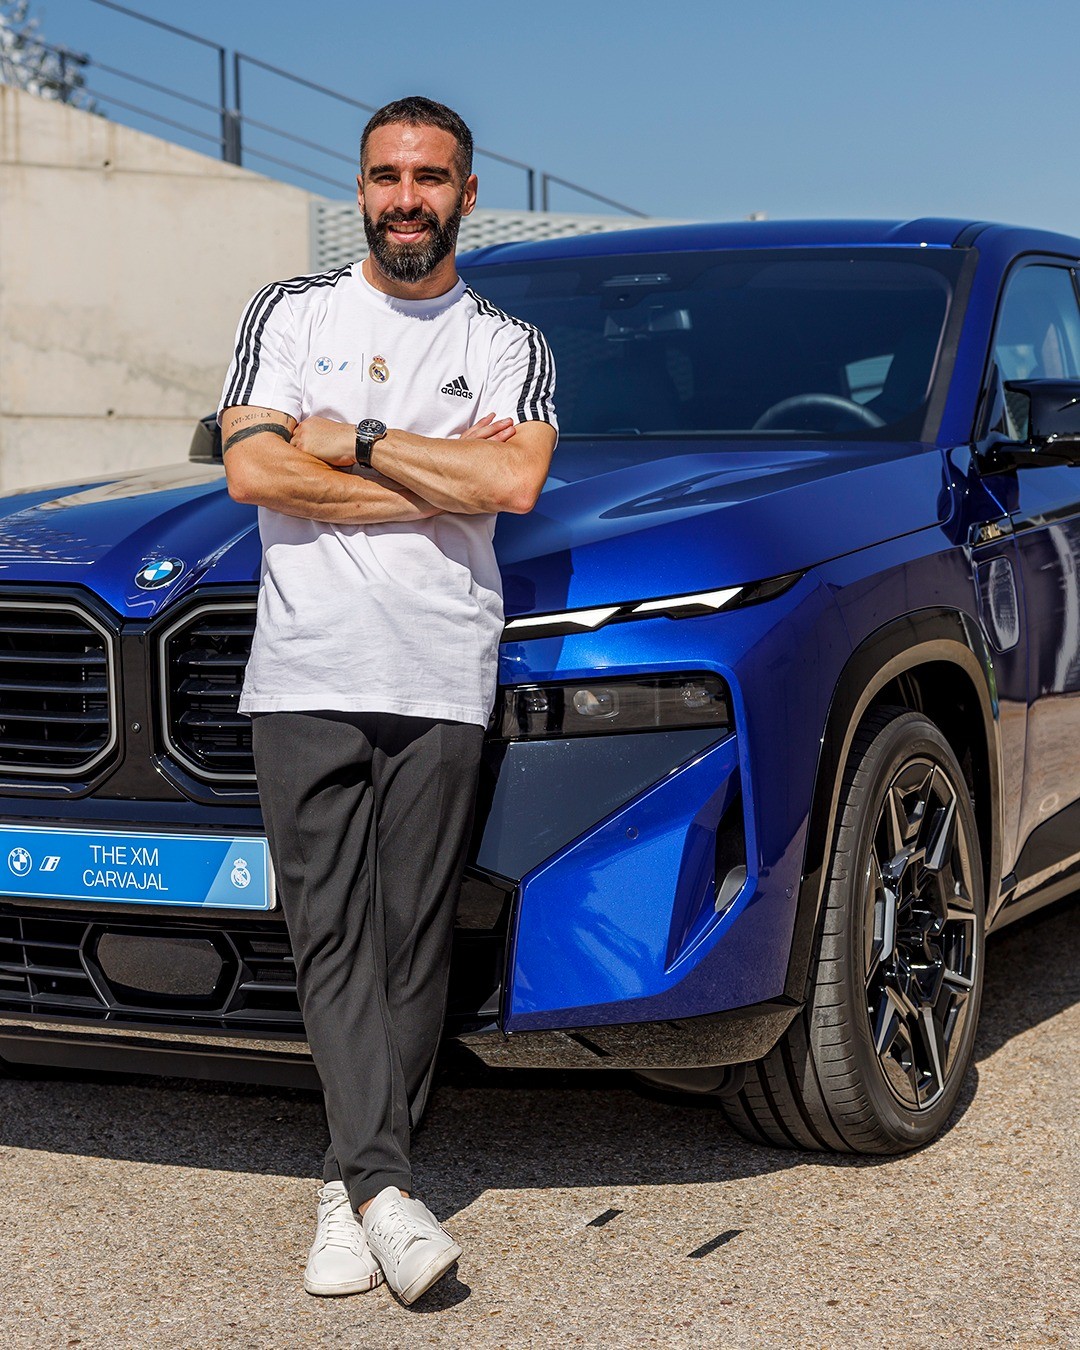 Real Madrid's Soccer Stars Just Got Their Brand-New BMWs, Here's